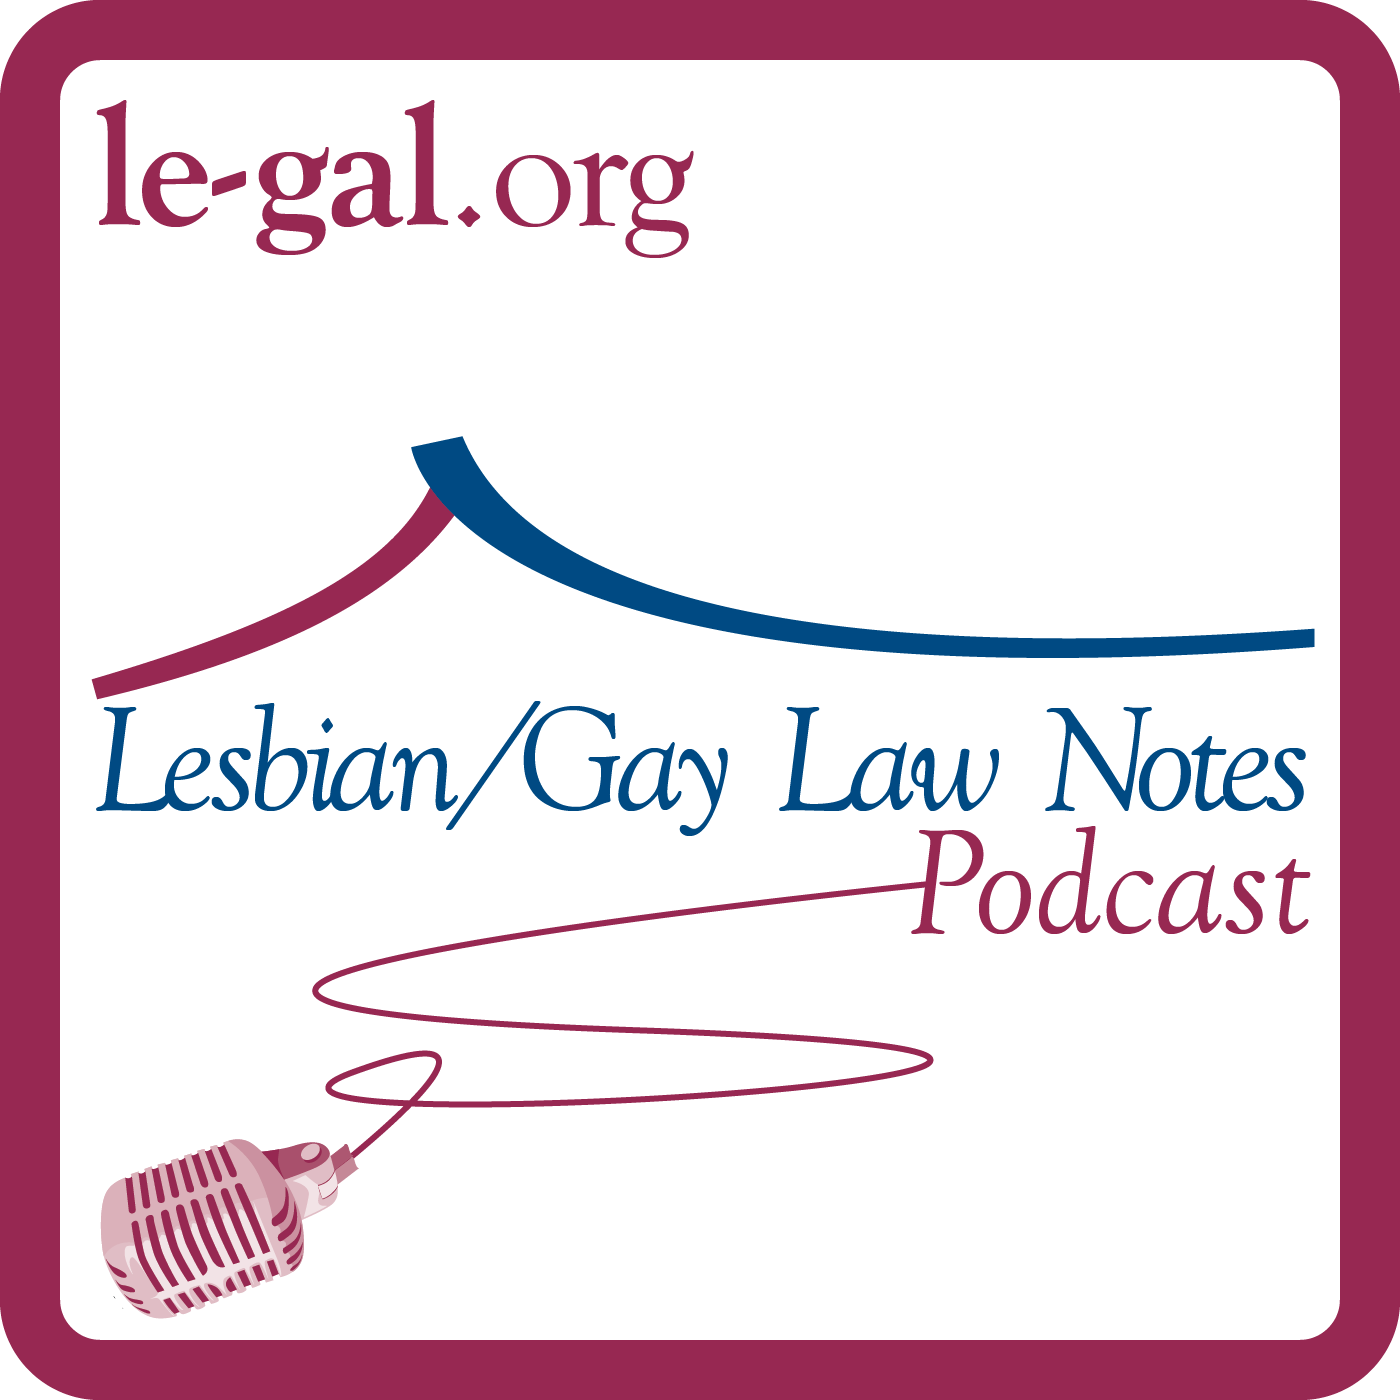 Lesbian/Gay Law Notes Podcast: June 2014